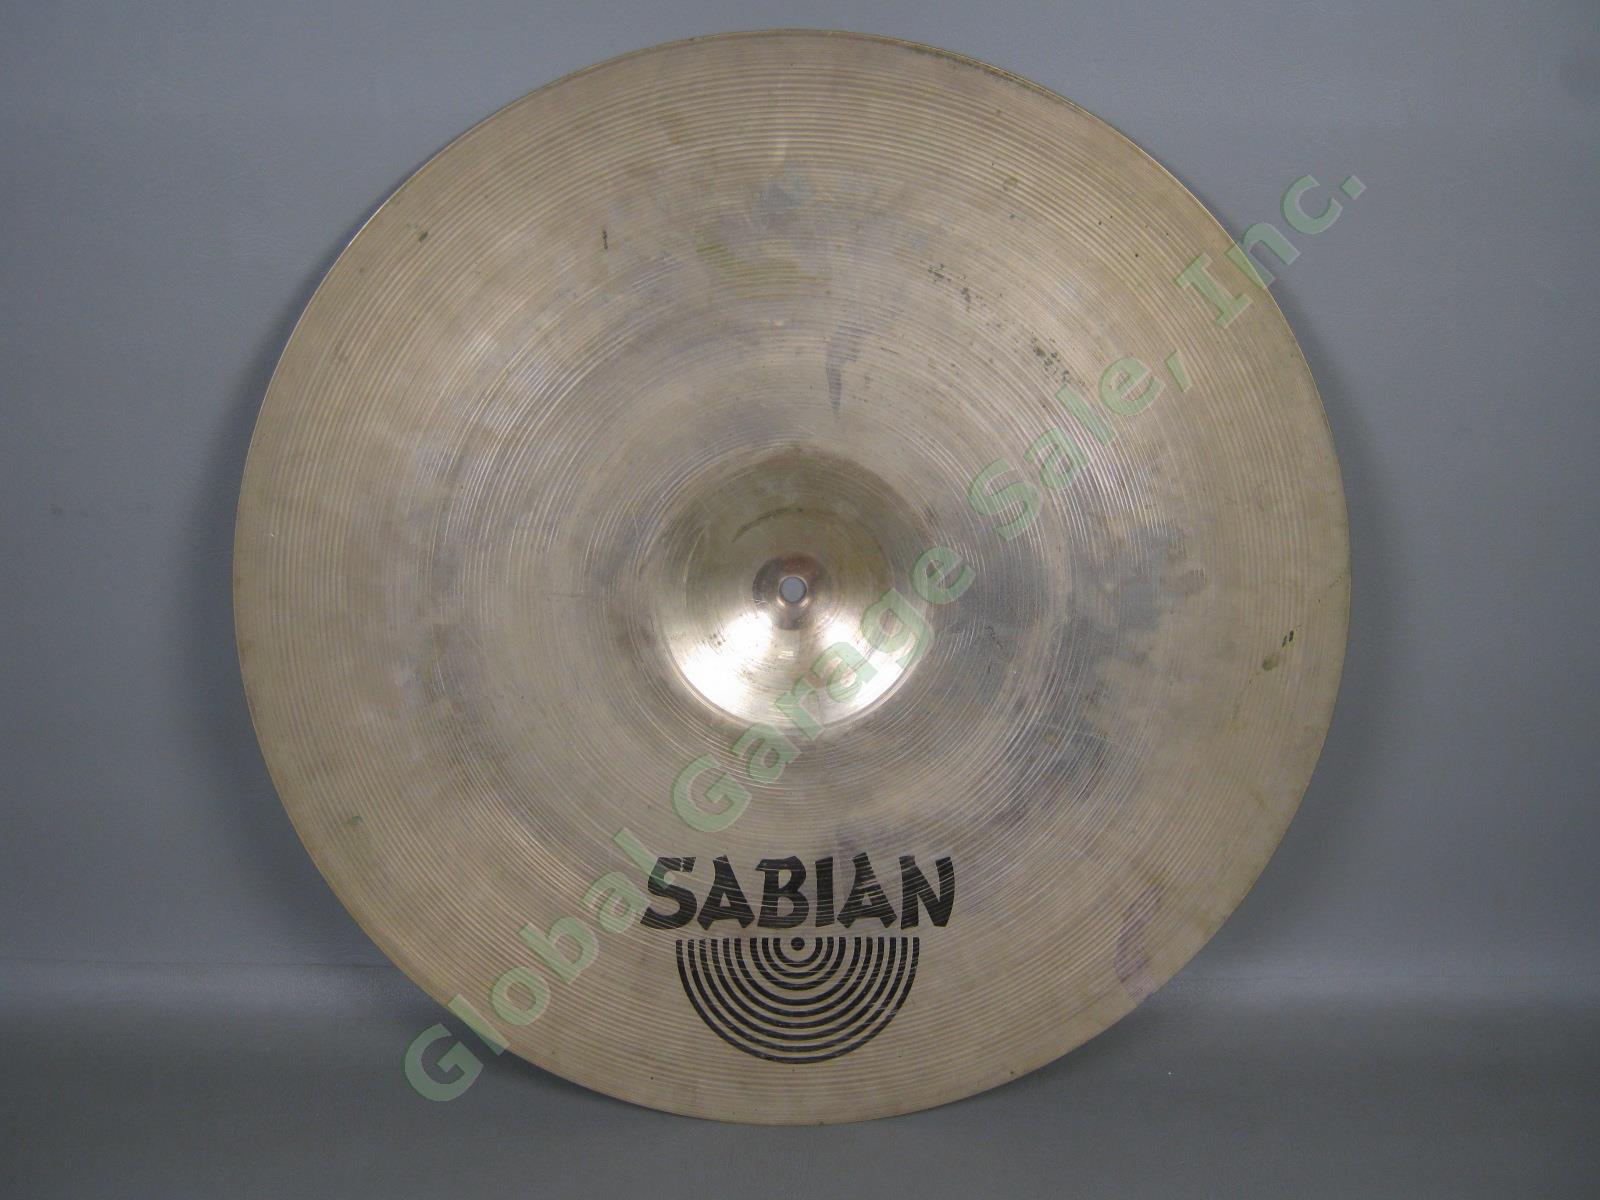 Sabian 20" Inch Ride Drum Cymbal Made In Canada Exc Cond NO RESERVE PRICE! 4